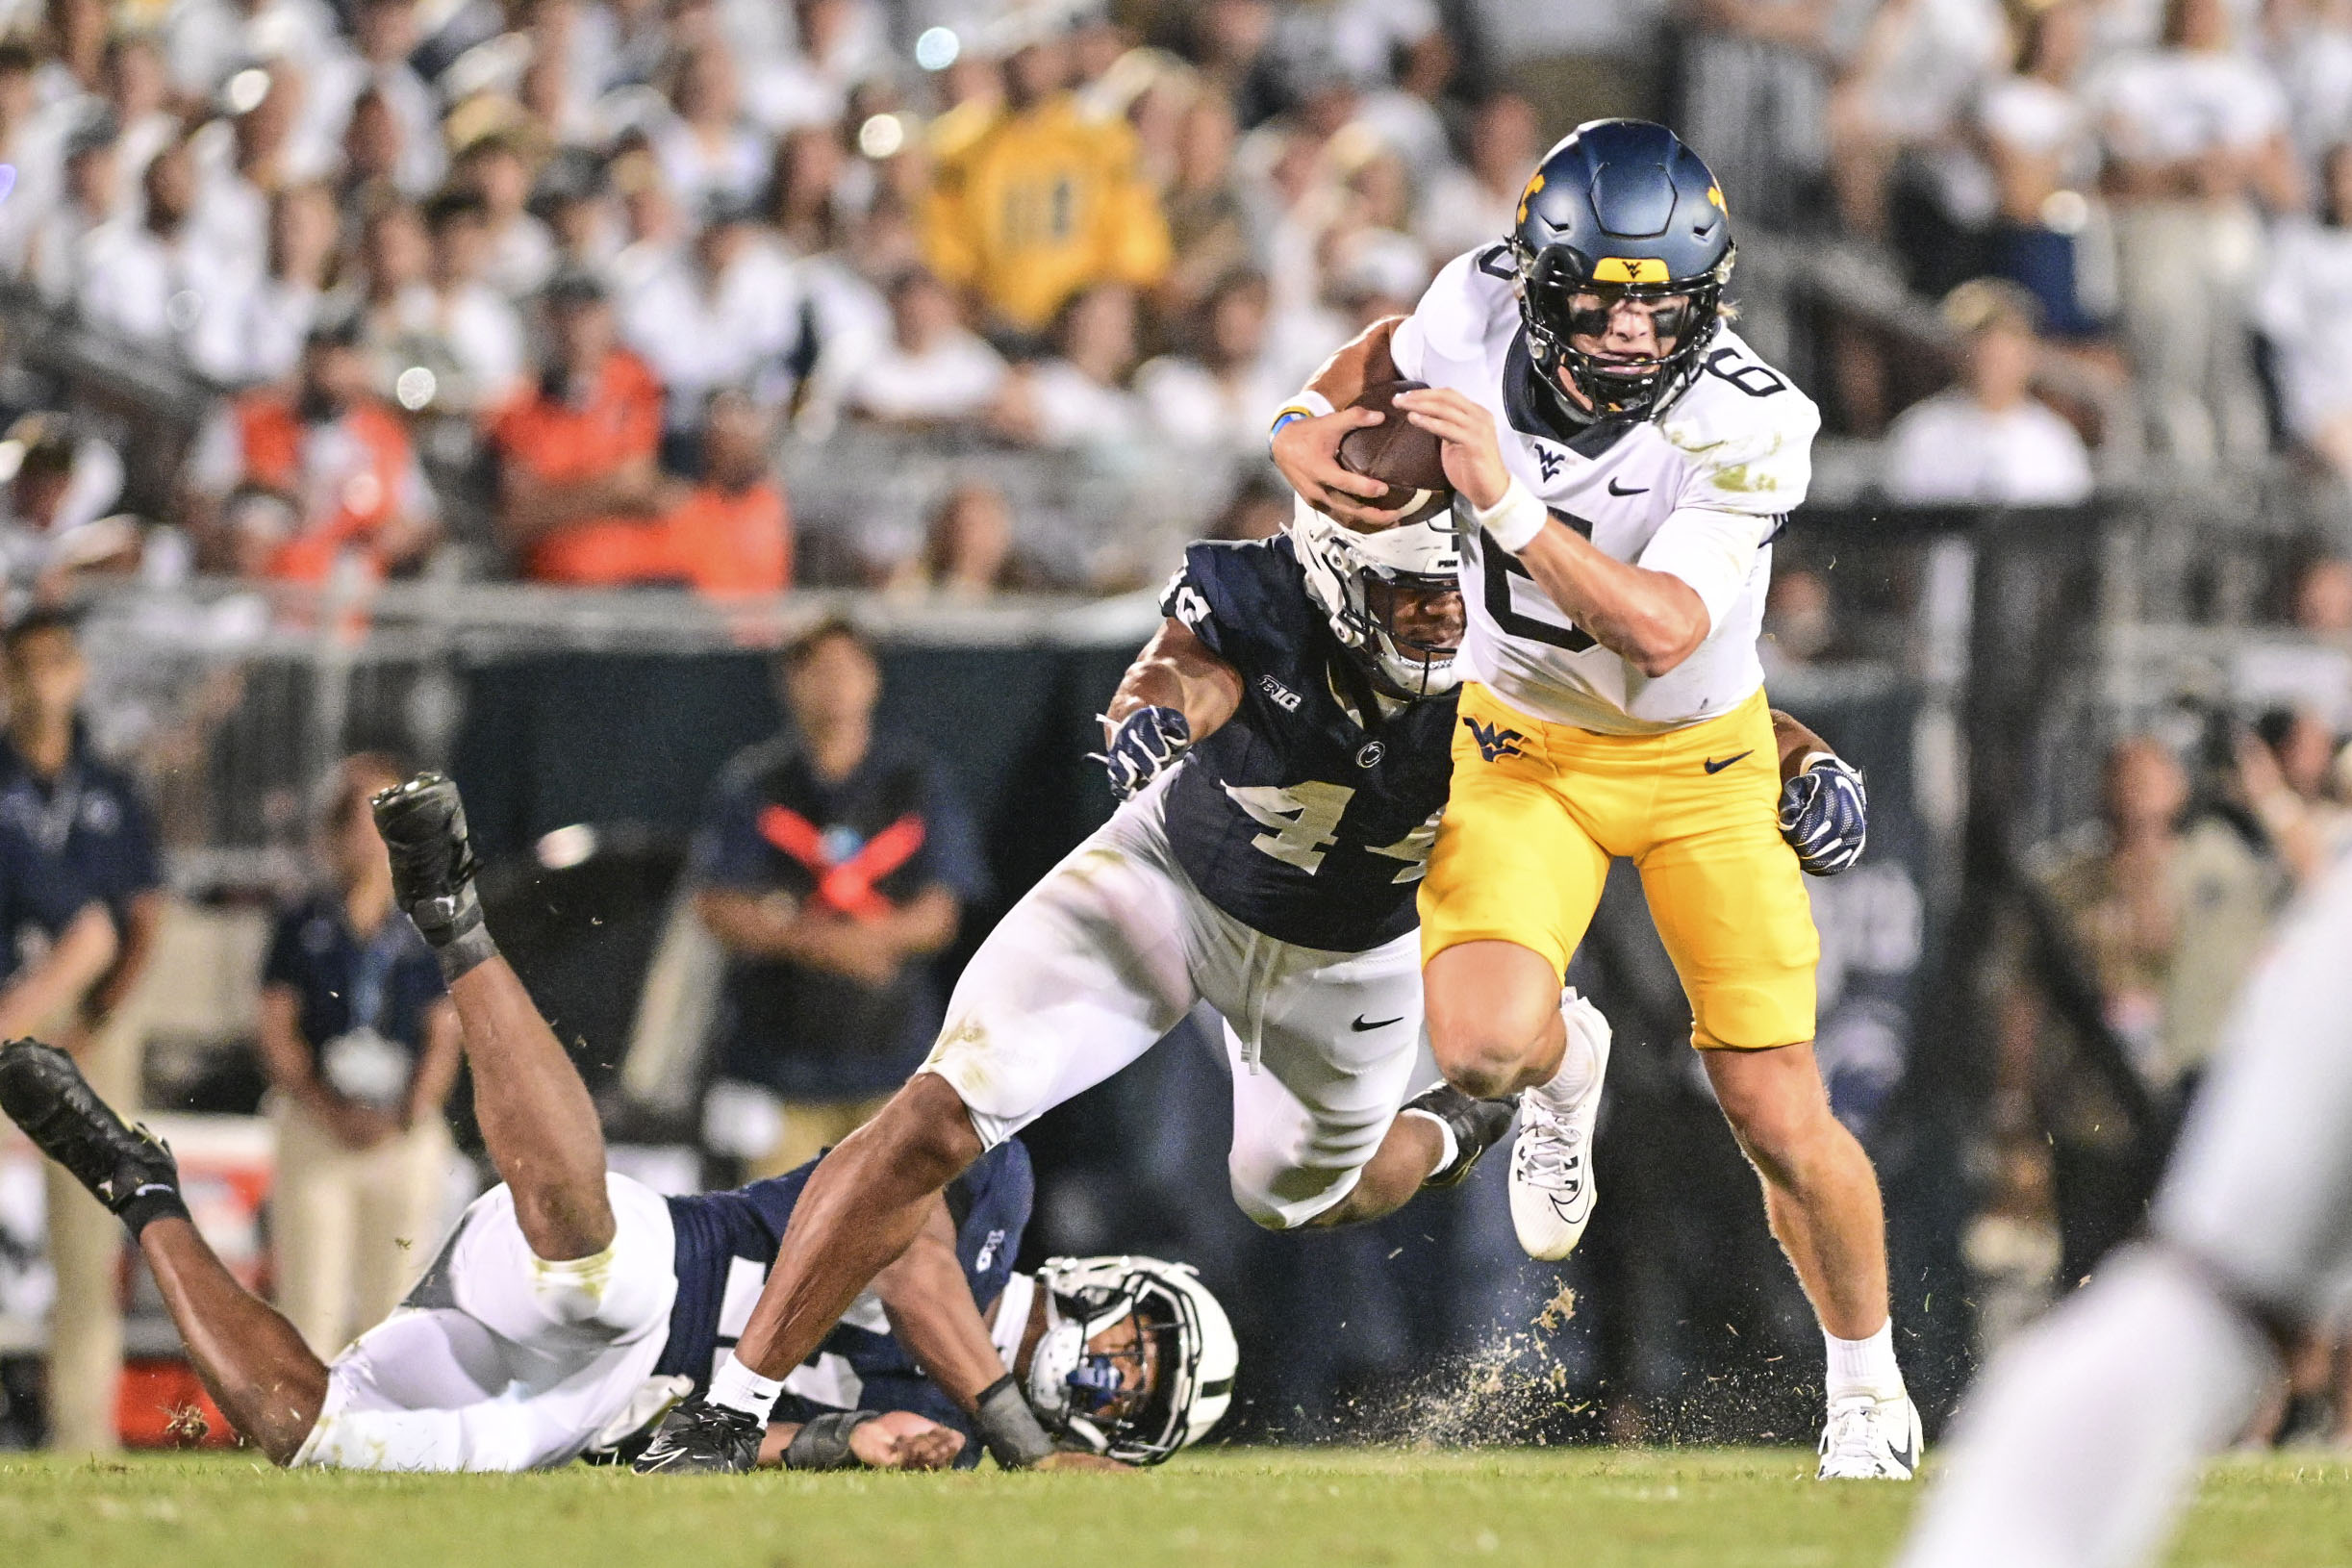 COLUMN WVU couldn't lean on strengths as Penn State exploited its